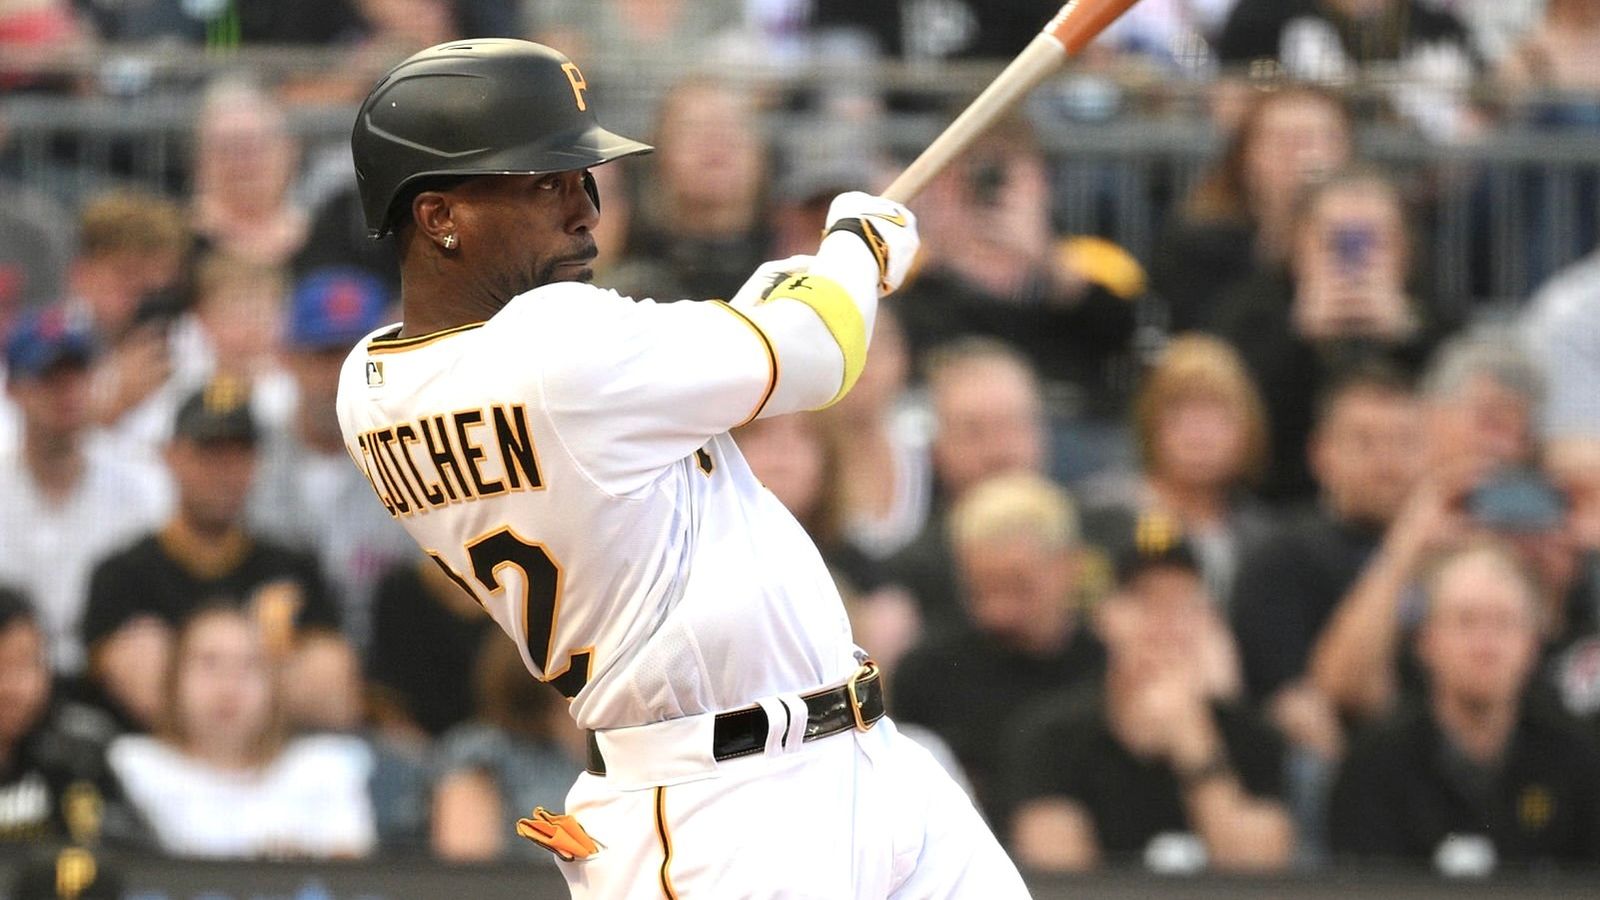 Andrew McCutchen returns to Pittsburgh wearing different jersey